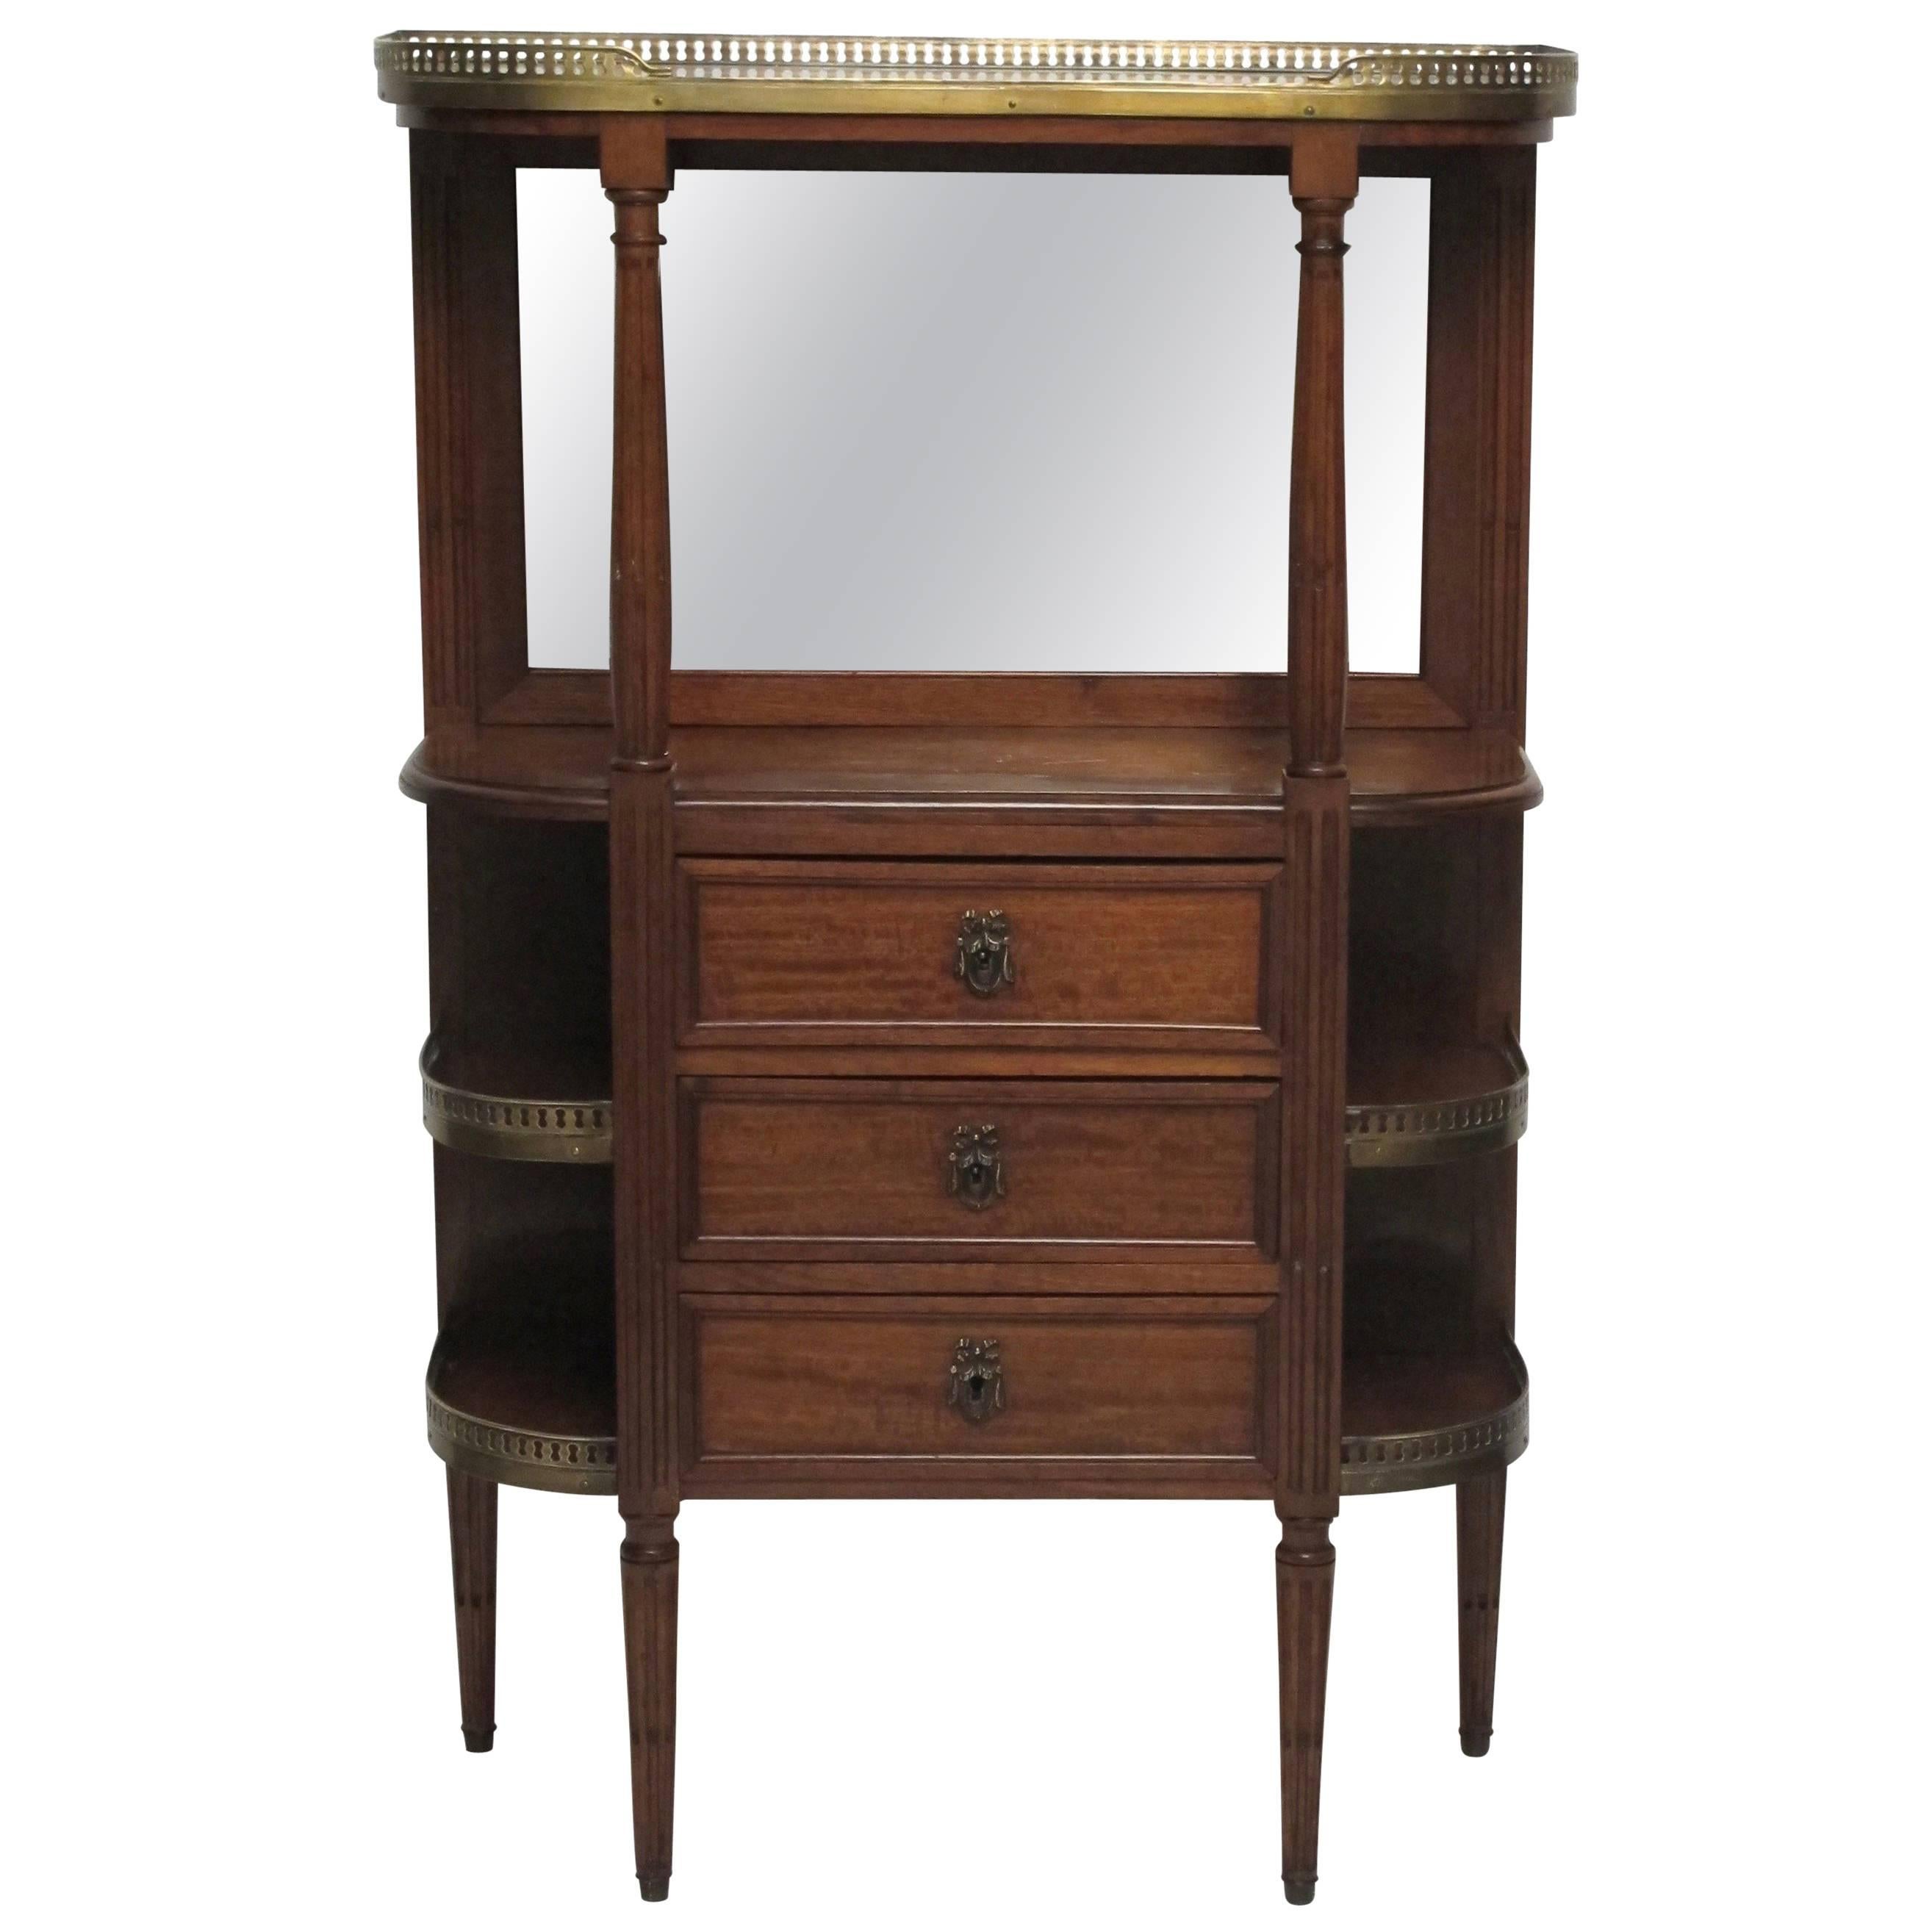 Mahogany Louis XVI Style What Not Stand with Marble Top, French, circa 1900